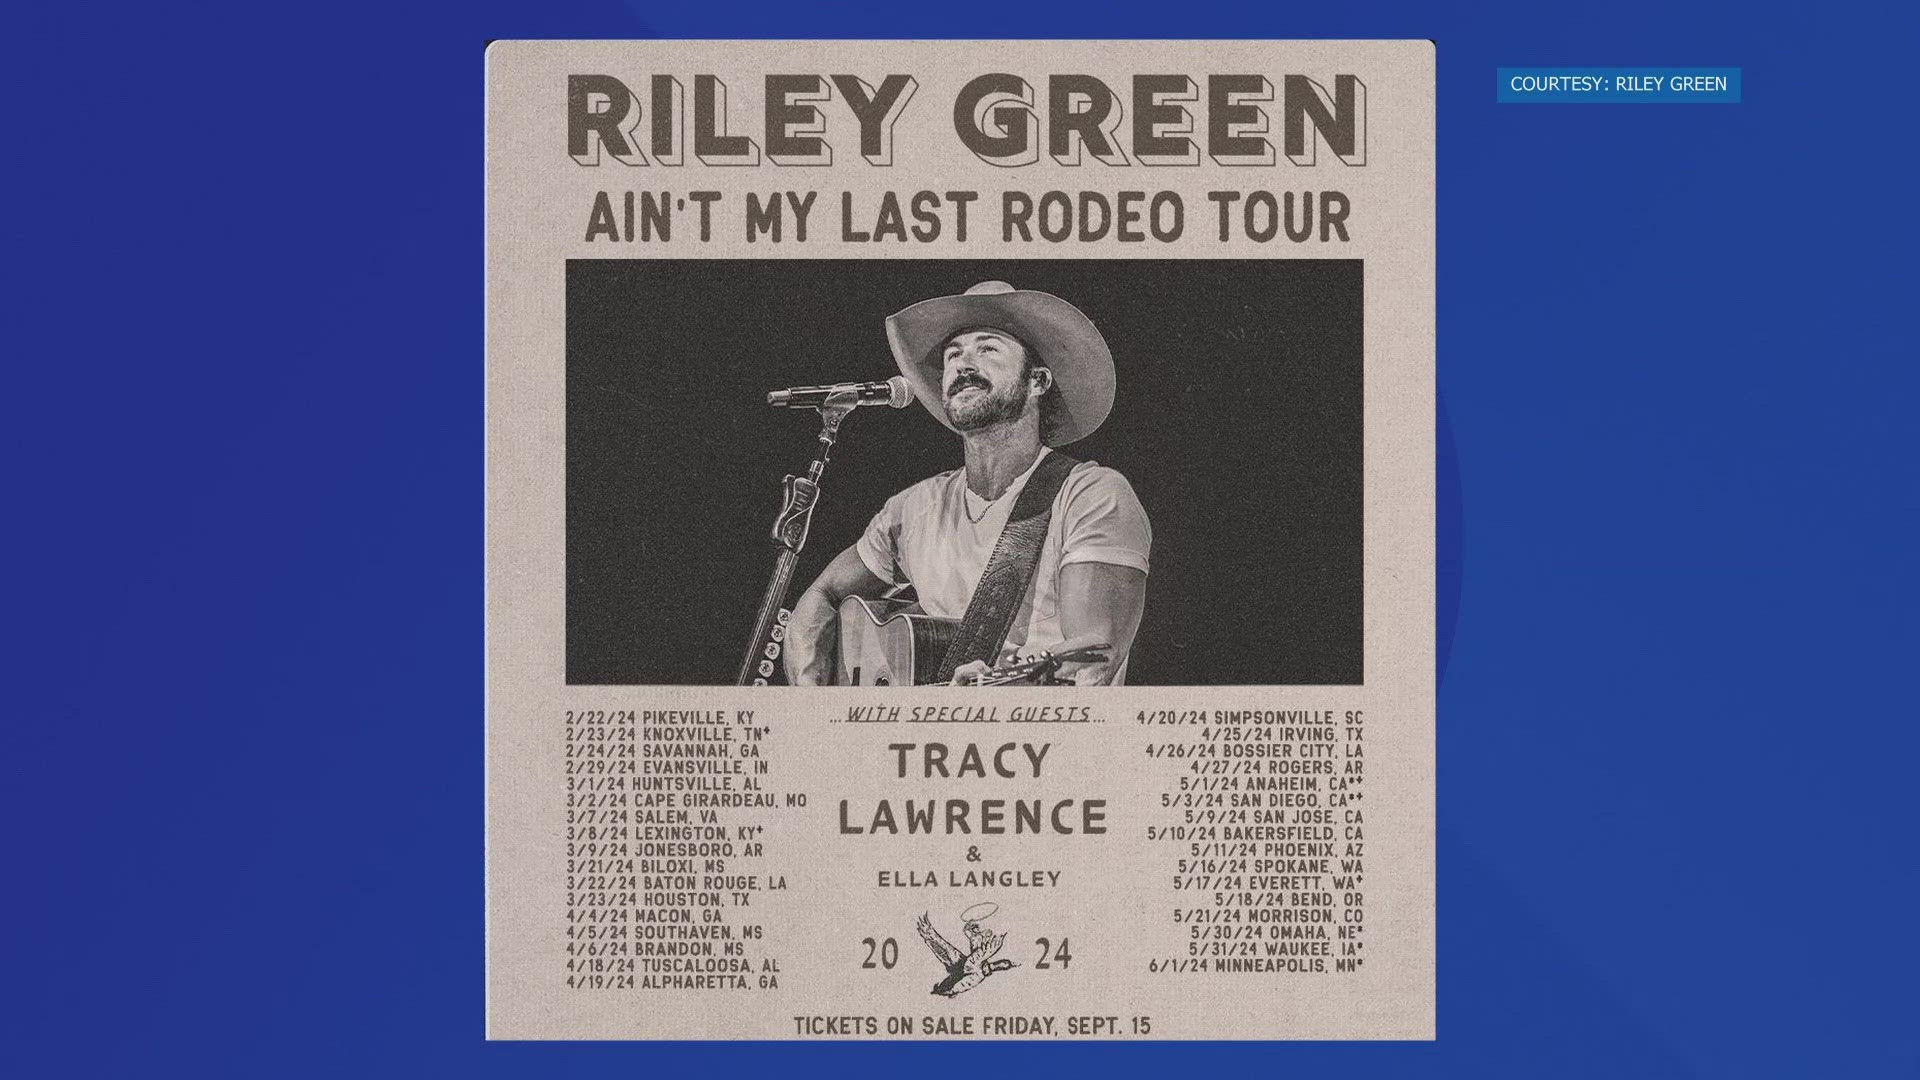 Riley Green will make a stop at Thompson-Boling Arena at Food City Center on Feb. 23 with special guests Tracy Lawrence and Ella Langley.